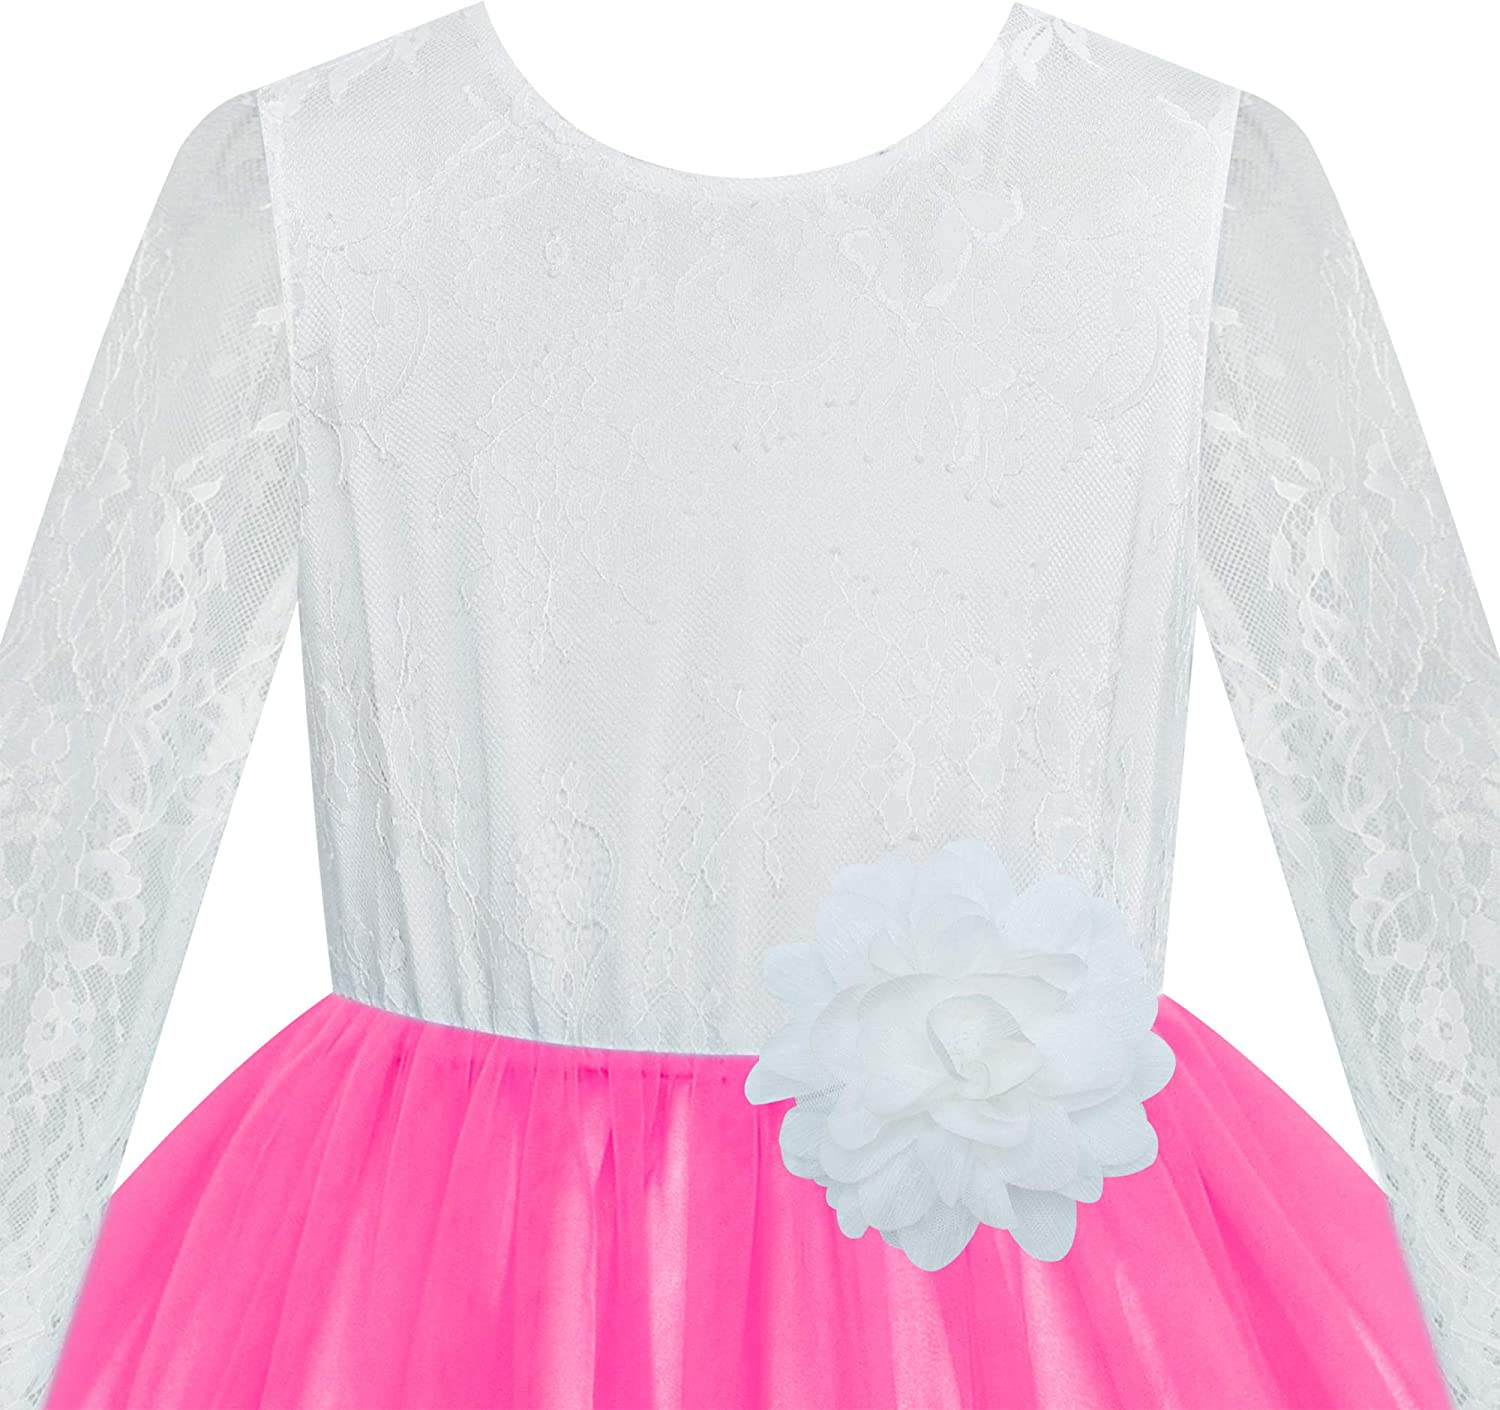 Lace Hi-Low Skirt Flower Girl Dress - Perfect for Weddings, Pageants, and Special Occasions!